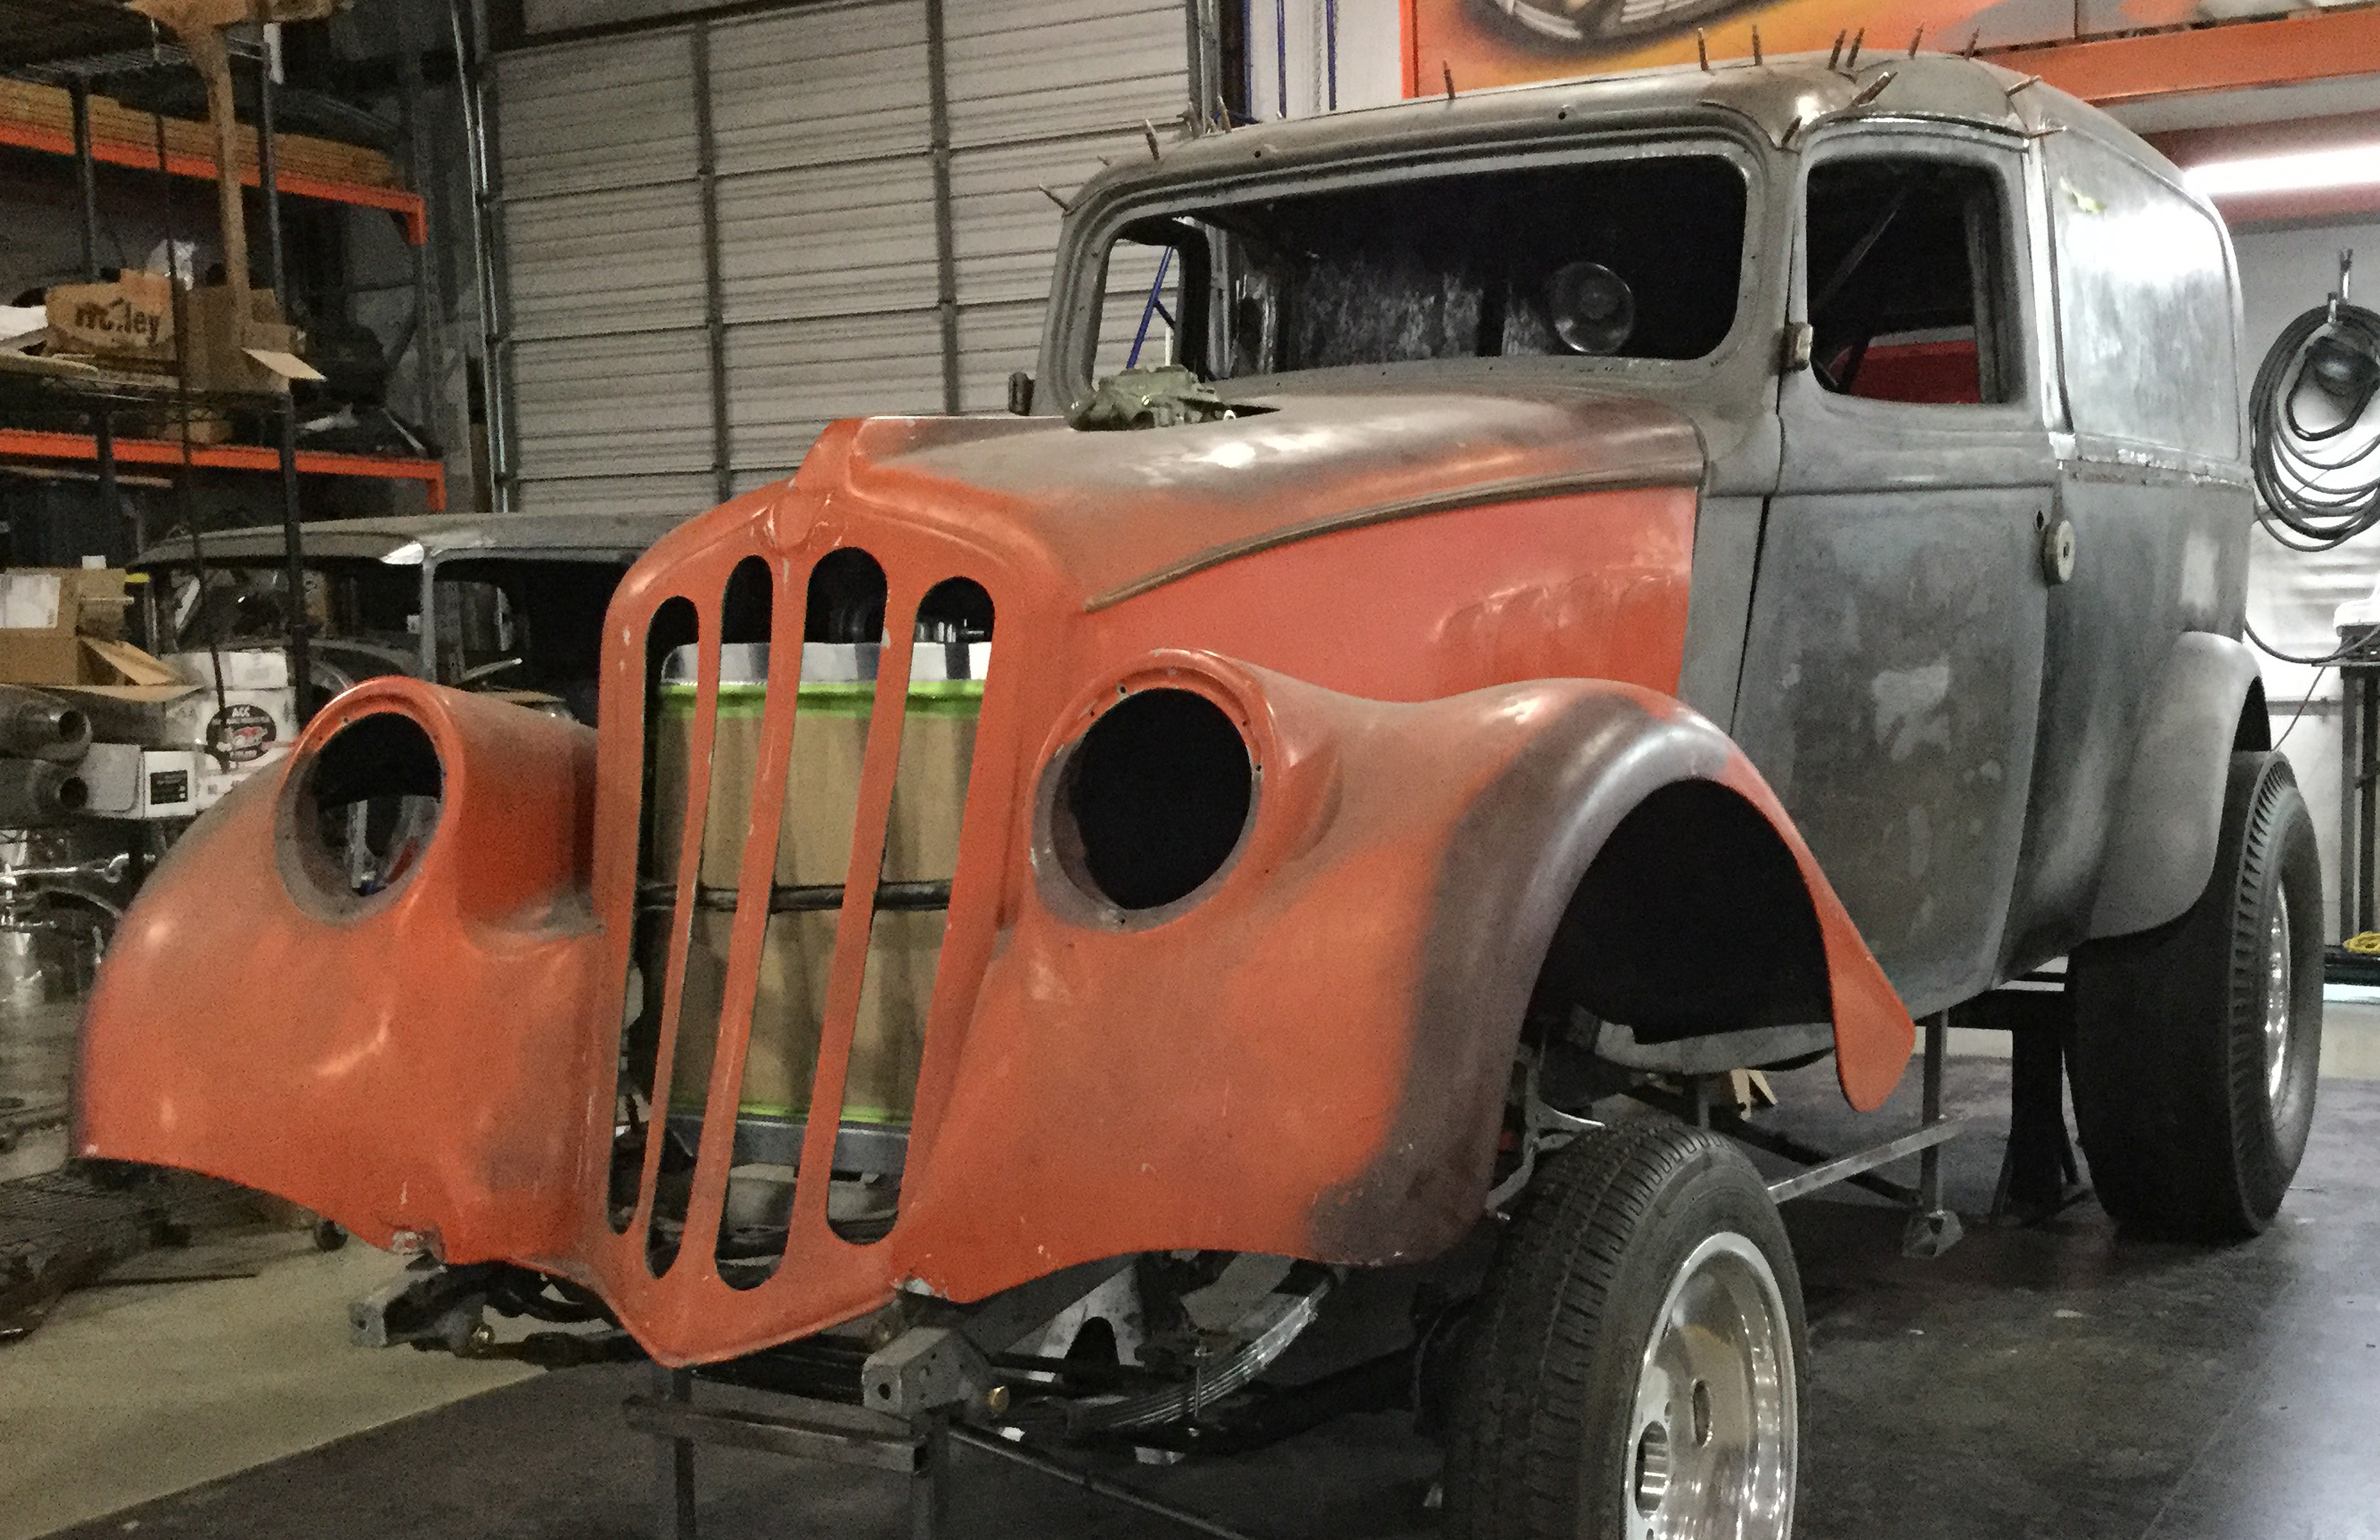 Finishing up the Willys Gasser project at Metal Union Speed Shop